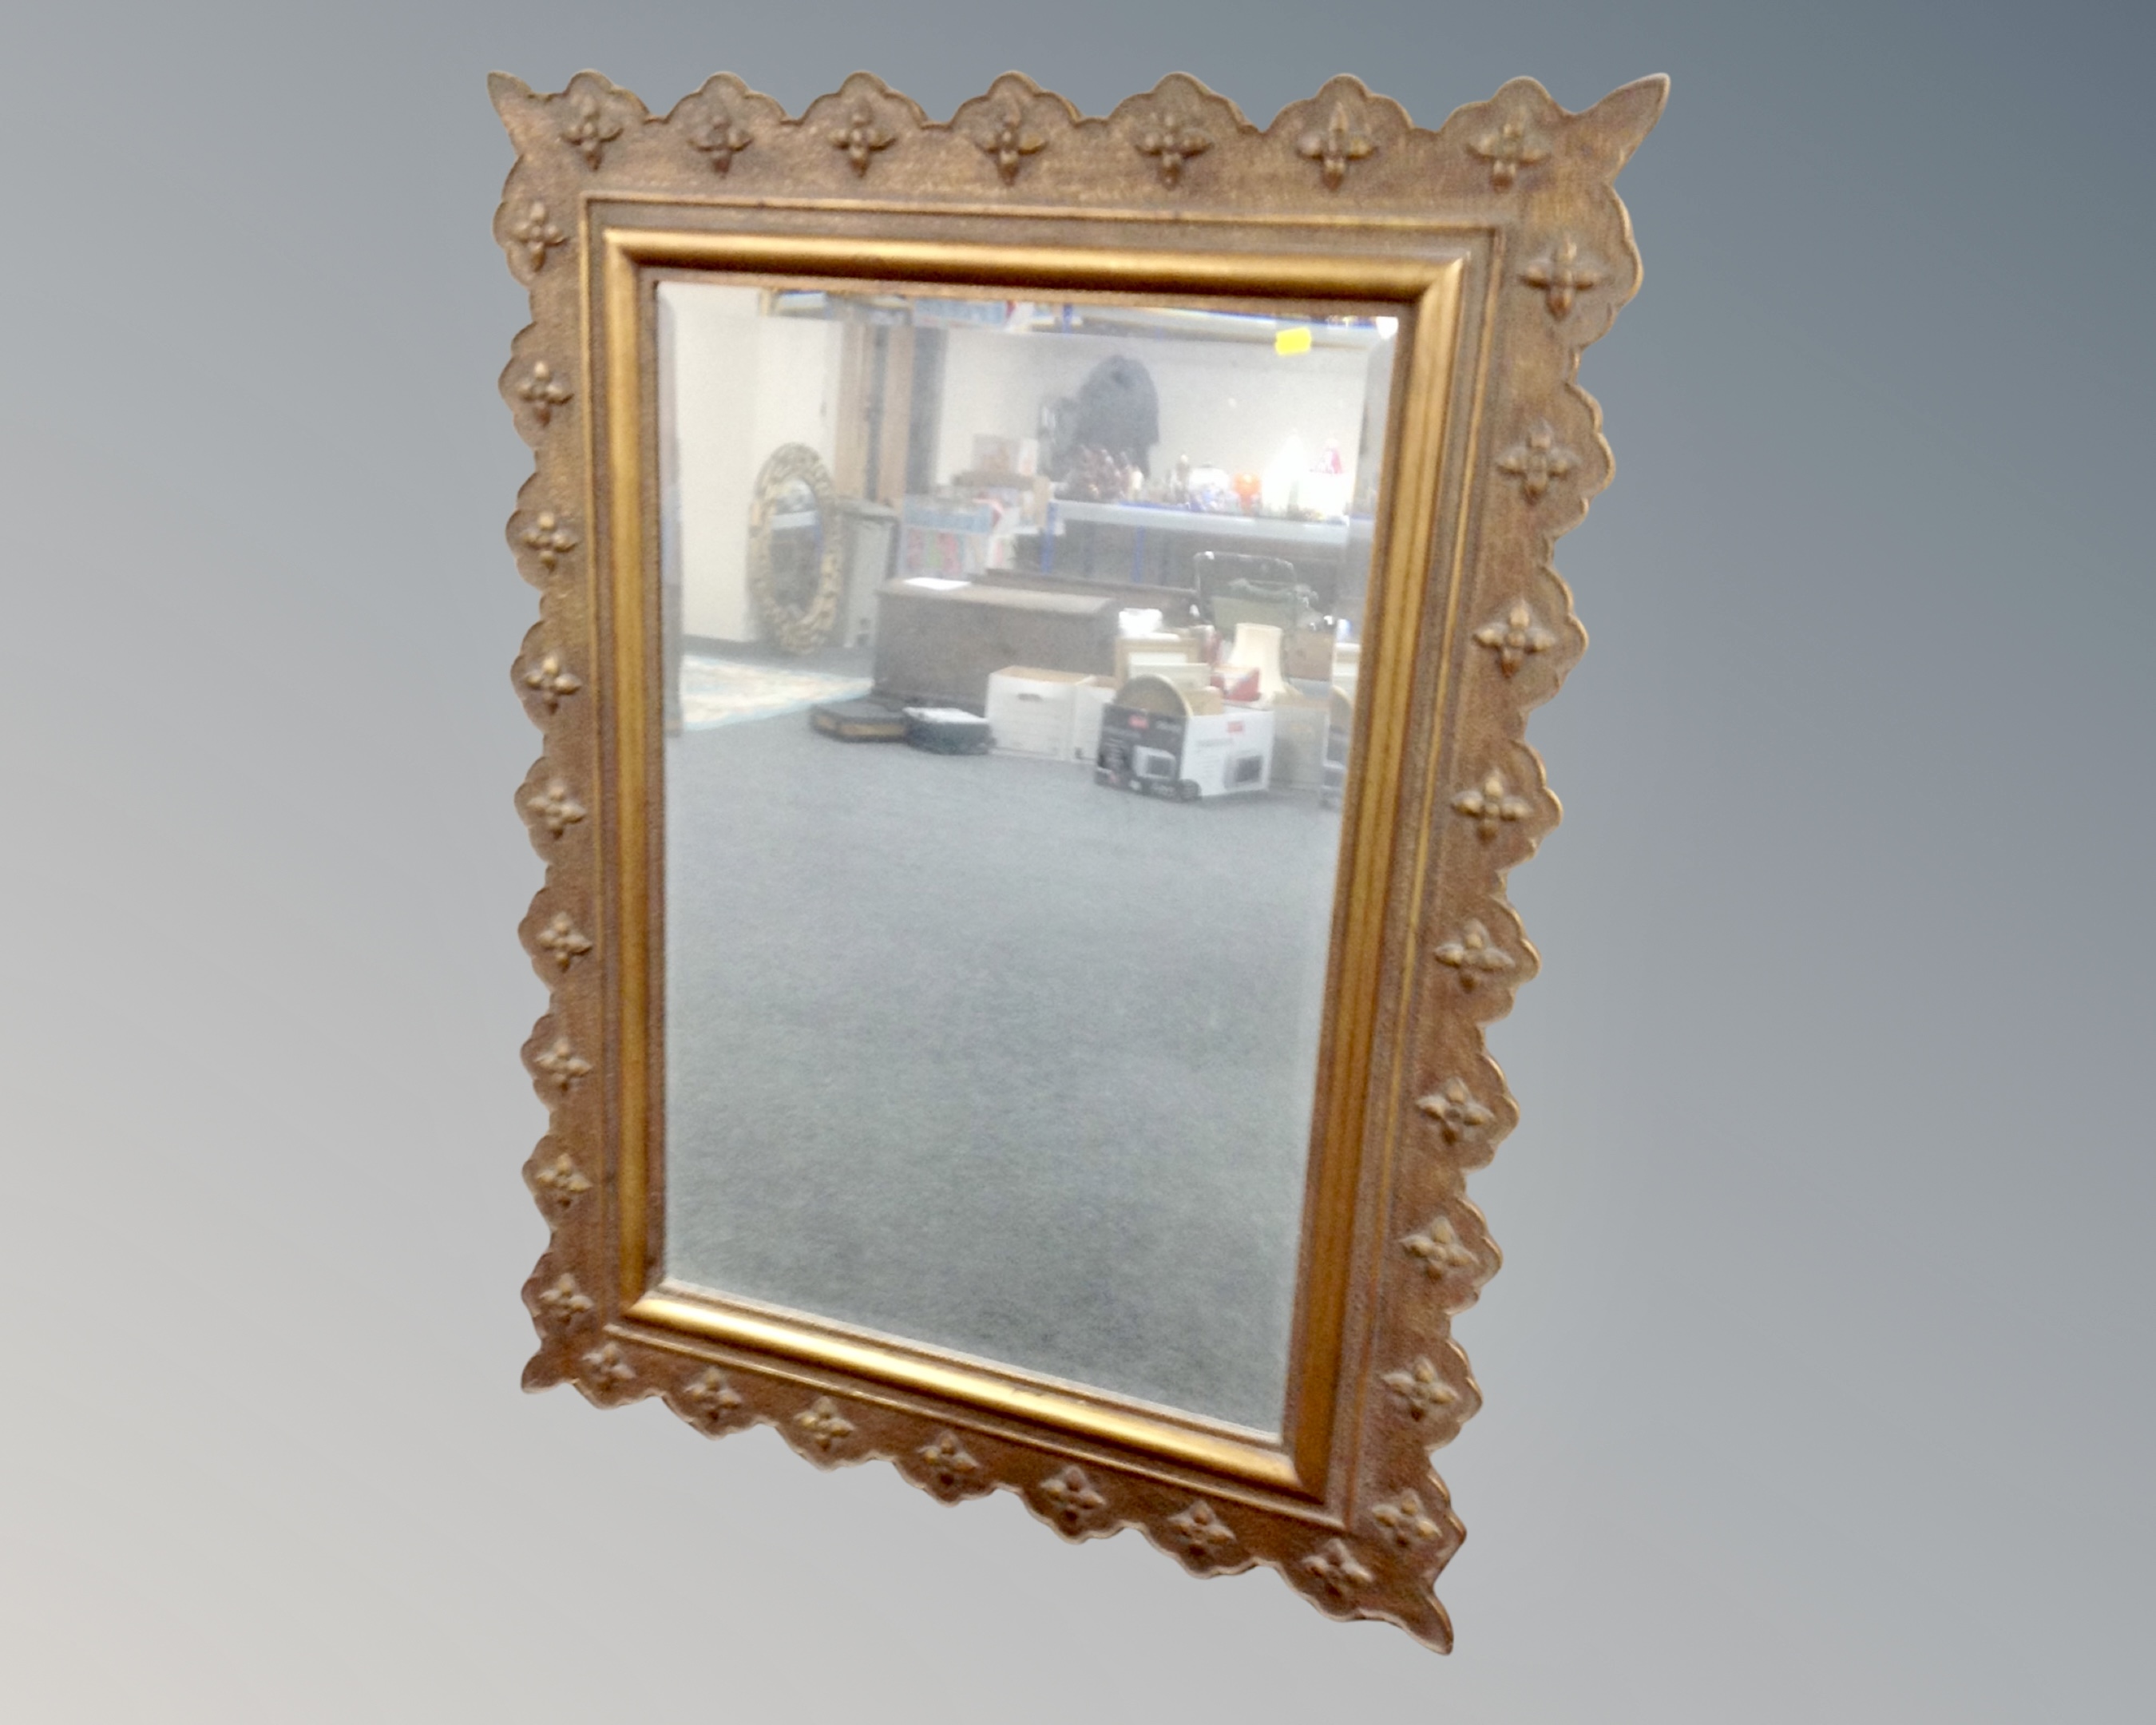 A contemporary bevelled mirror in an antique style frame